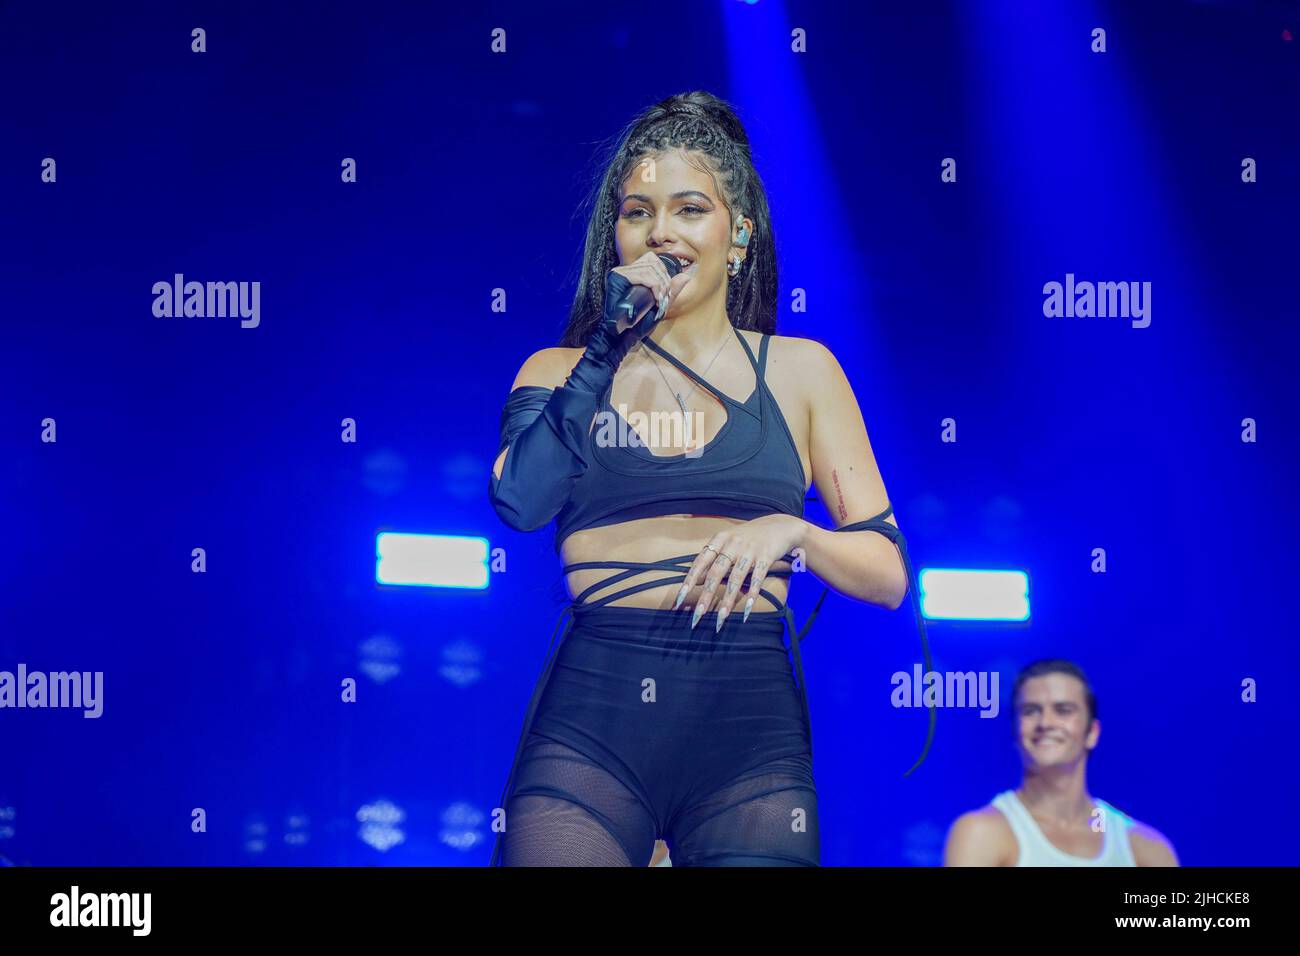 London, UK. Sunday, 17 July, 2022. Mabel performing live on stage at Somerset House in London as part of the Summer Series. Photo: Richard Gray/Alamy Live News Stock Photo